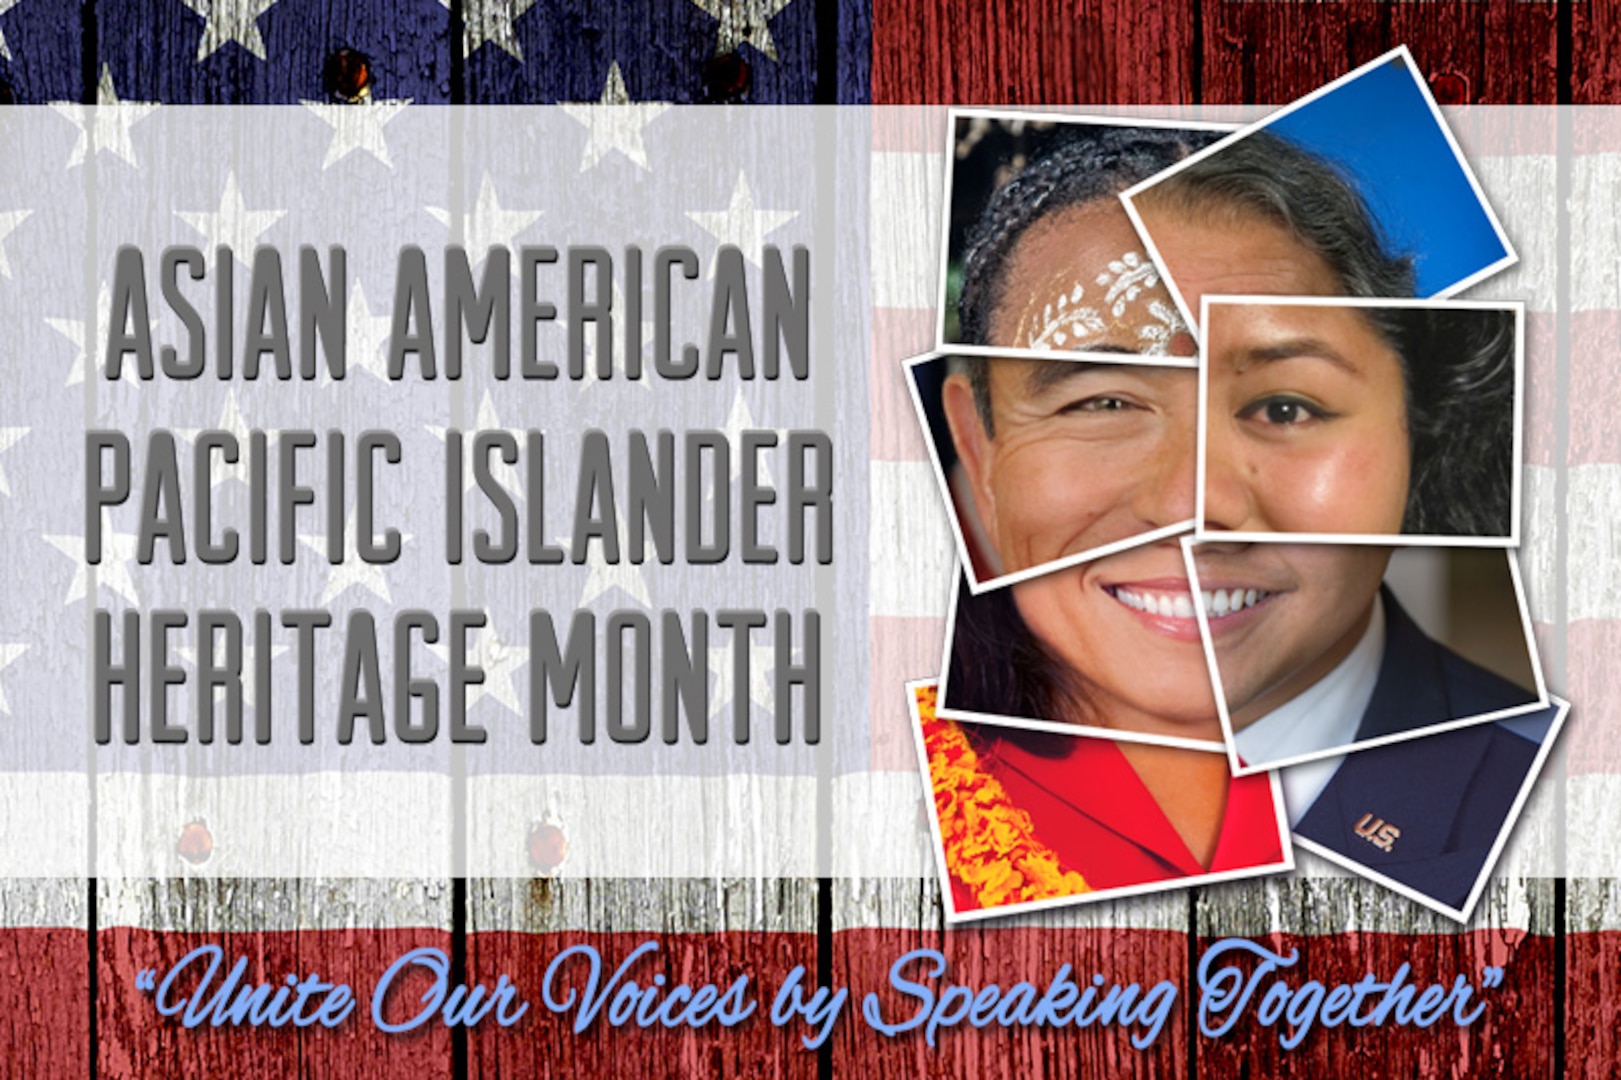 collage of images making the shape if an Asian American face.